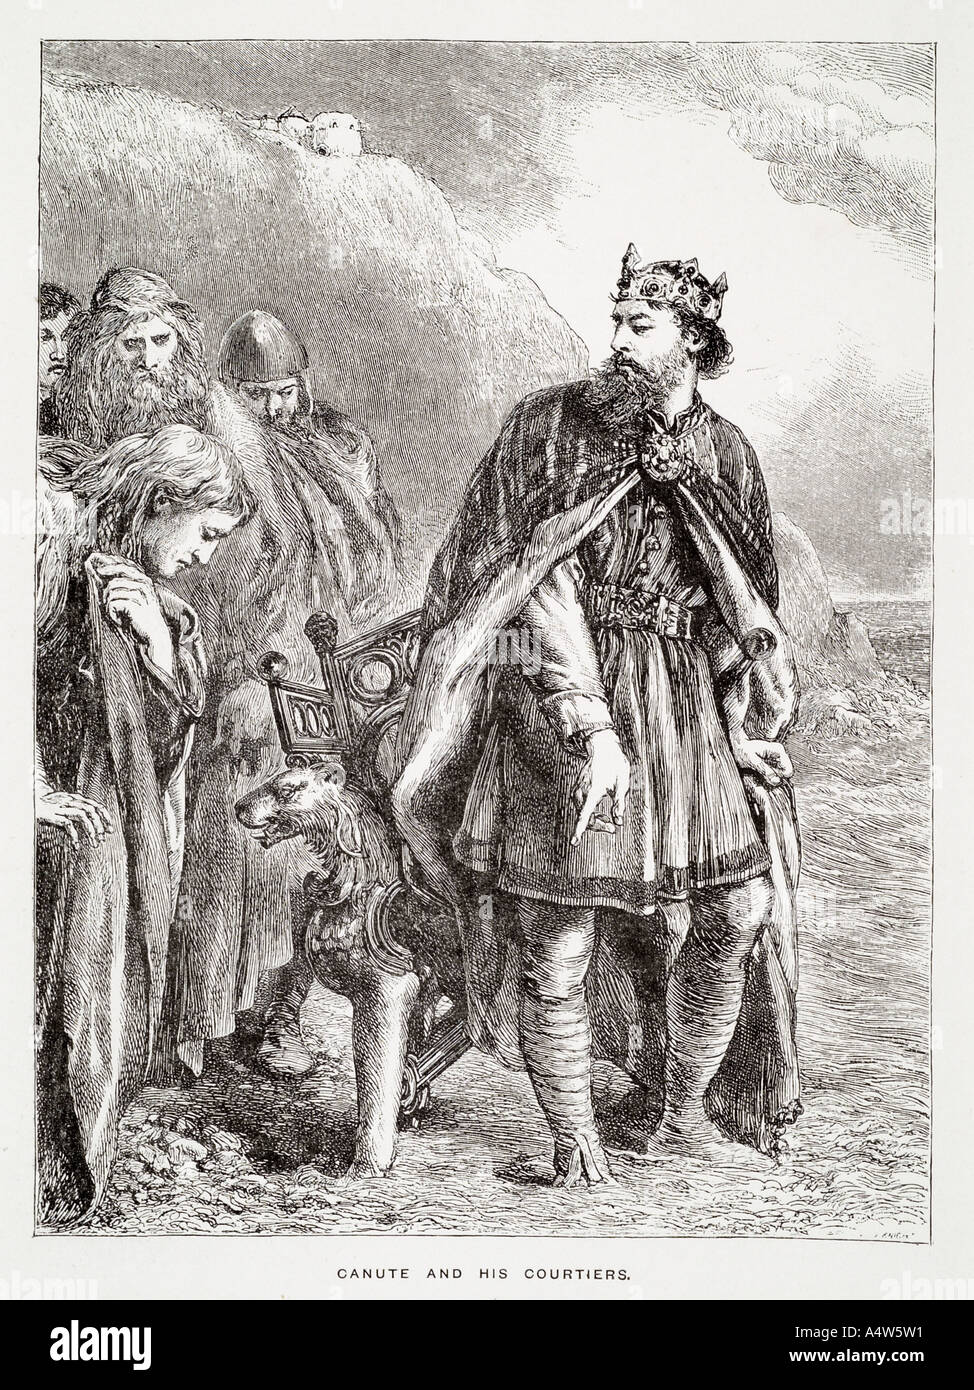 King Canute the Great, Ruthless Viking Emperor: Part 1 - The Rise of Canute  - Medieval Ware